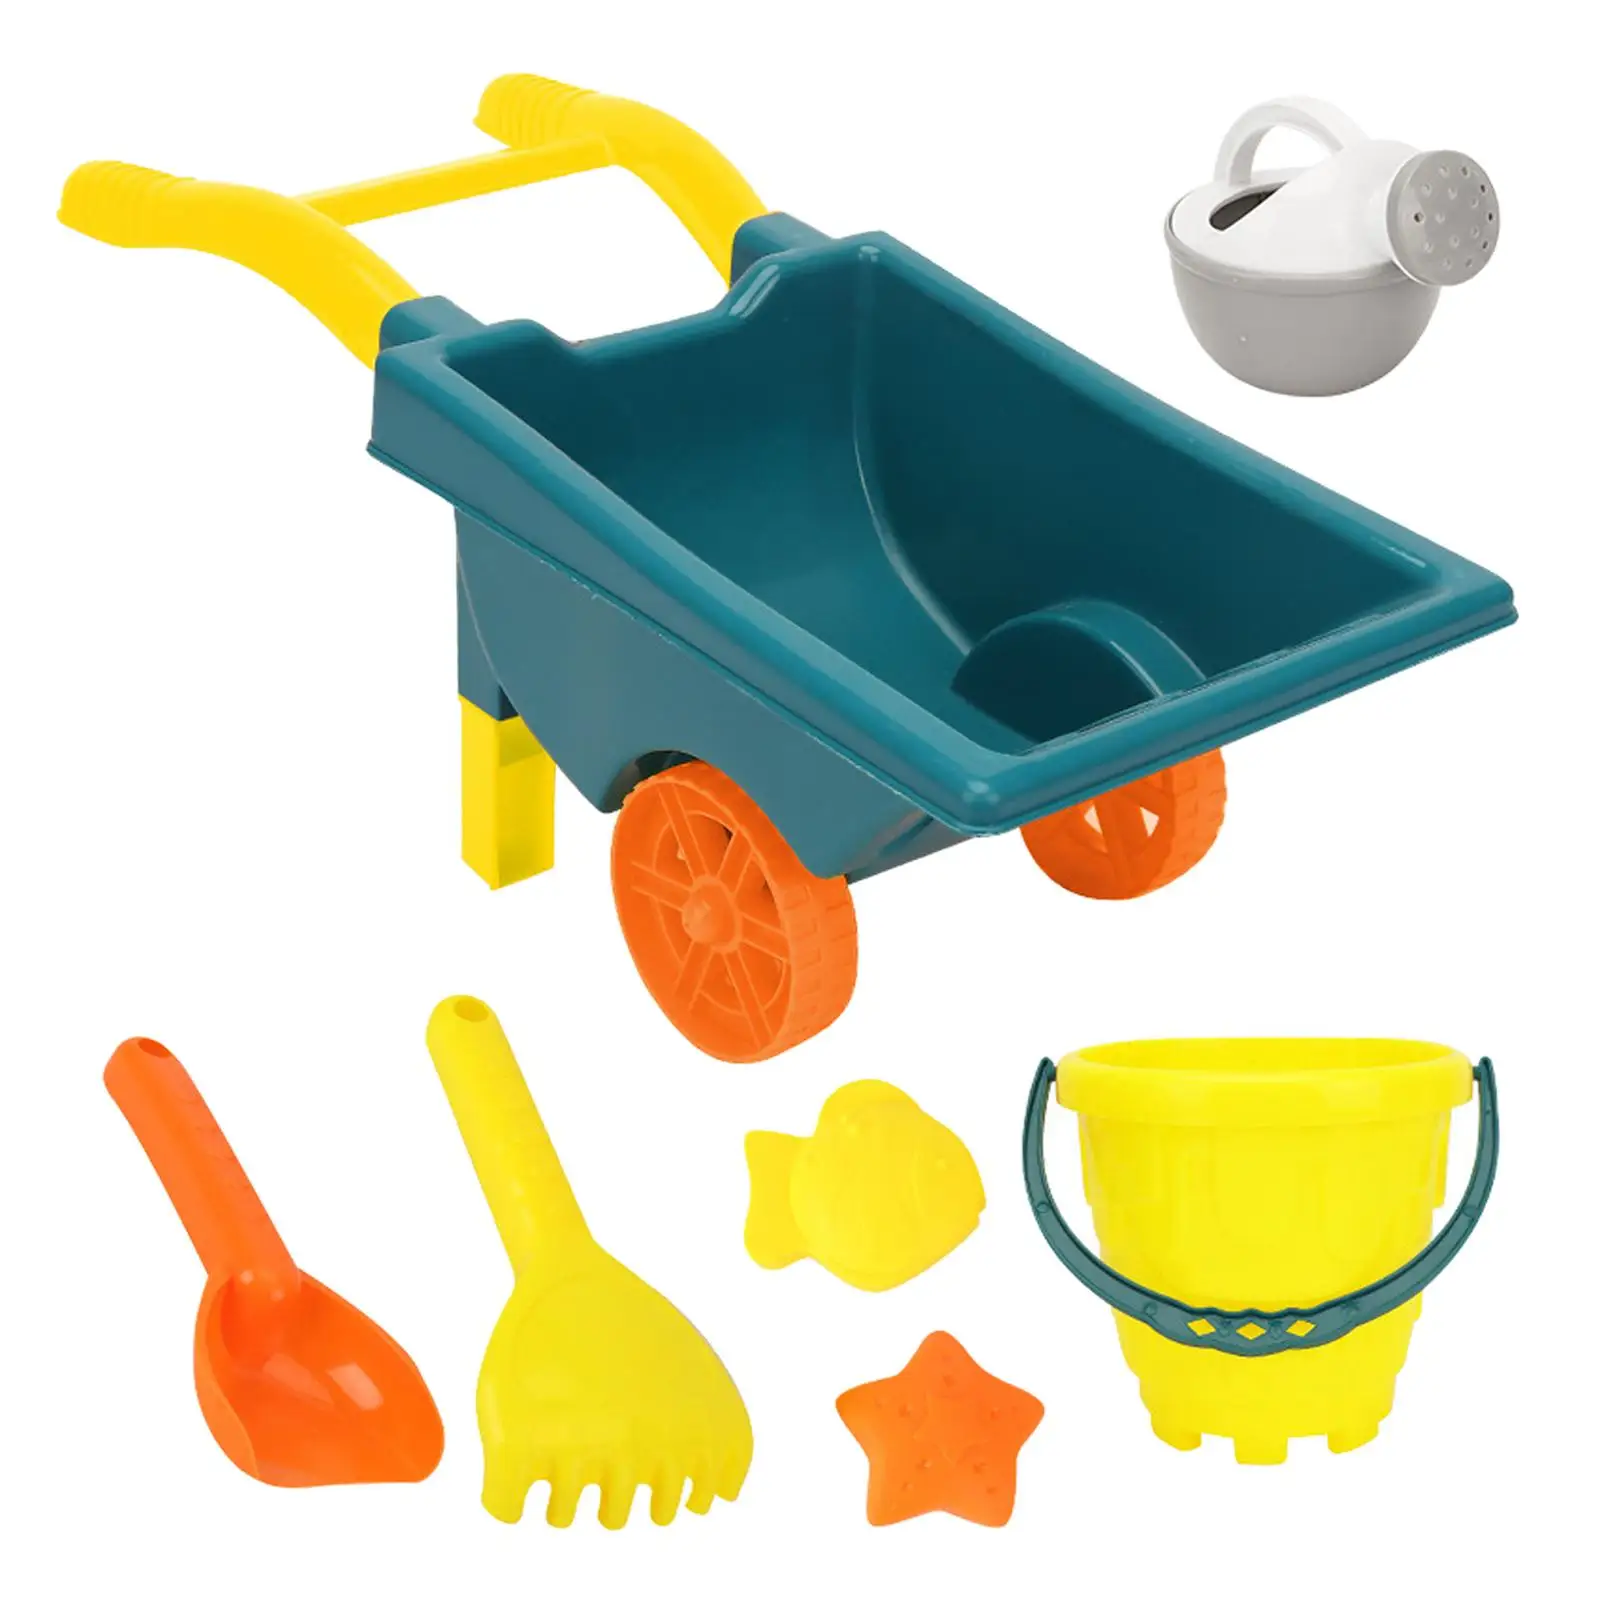 Sand Beach Toy Beach Game Toy Sandpit Toys Play Sand for Seaside Children Trolley YellowBucket